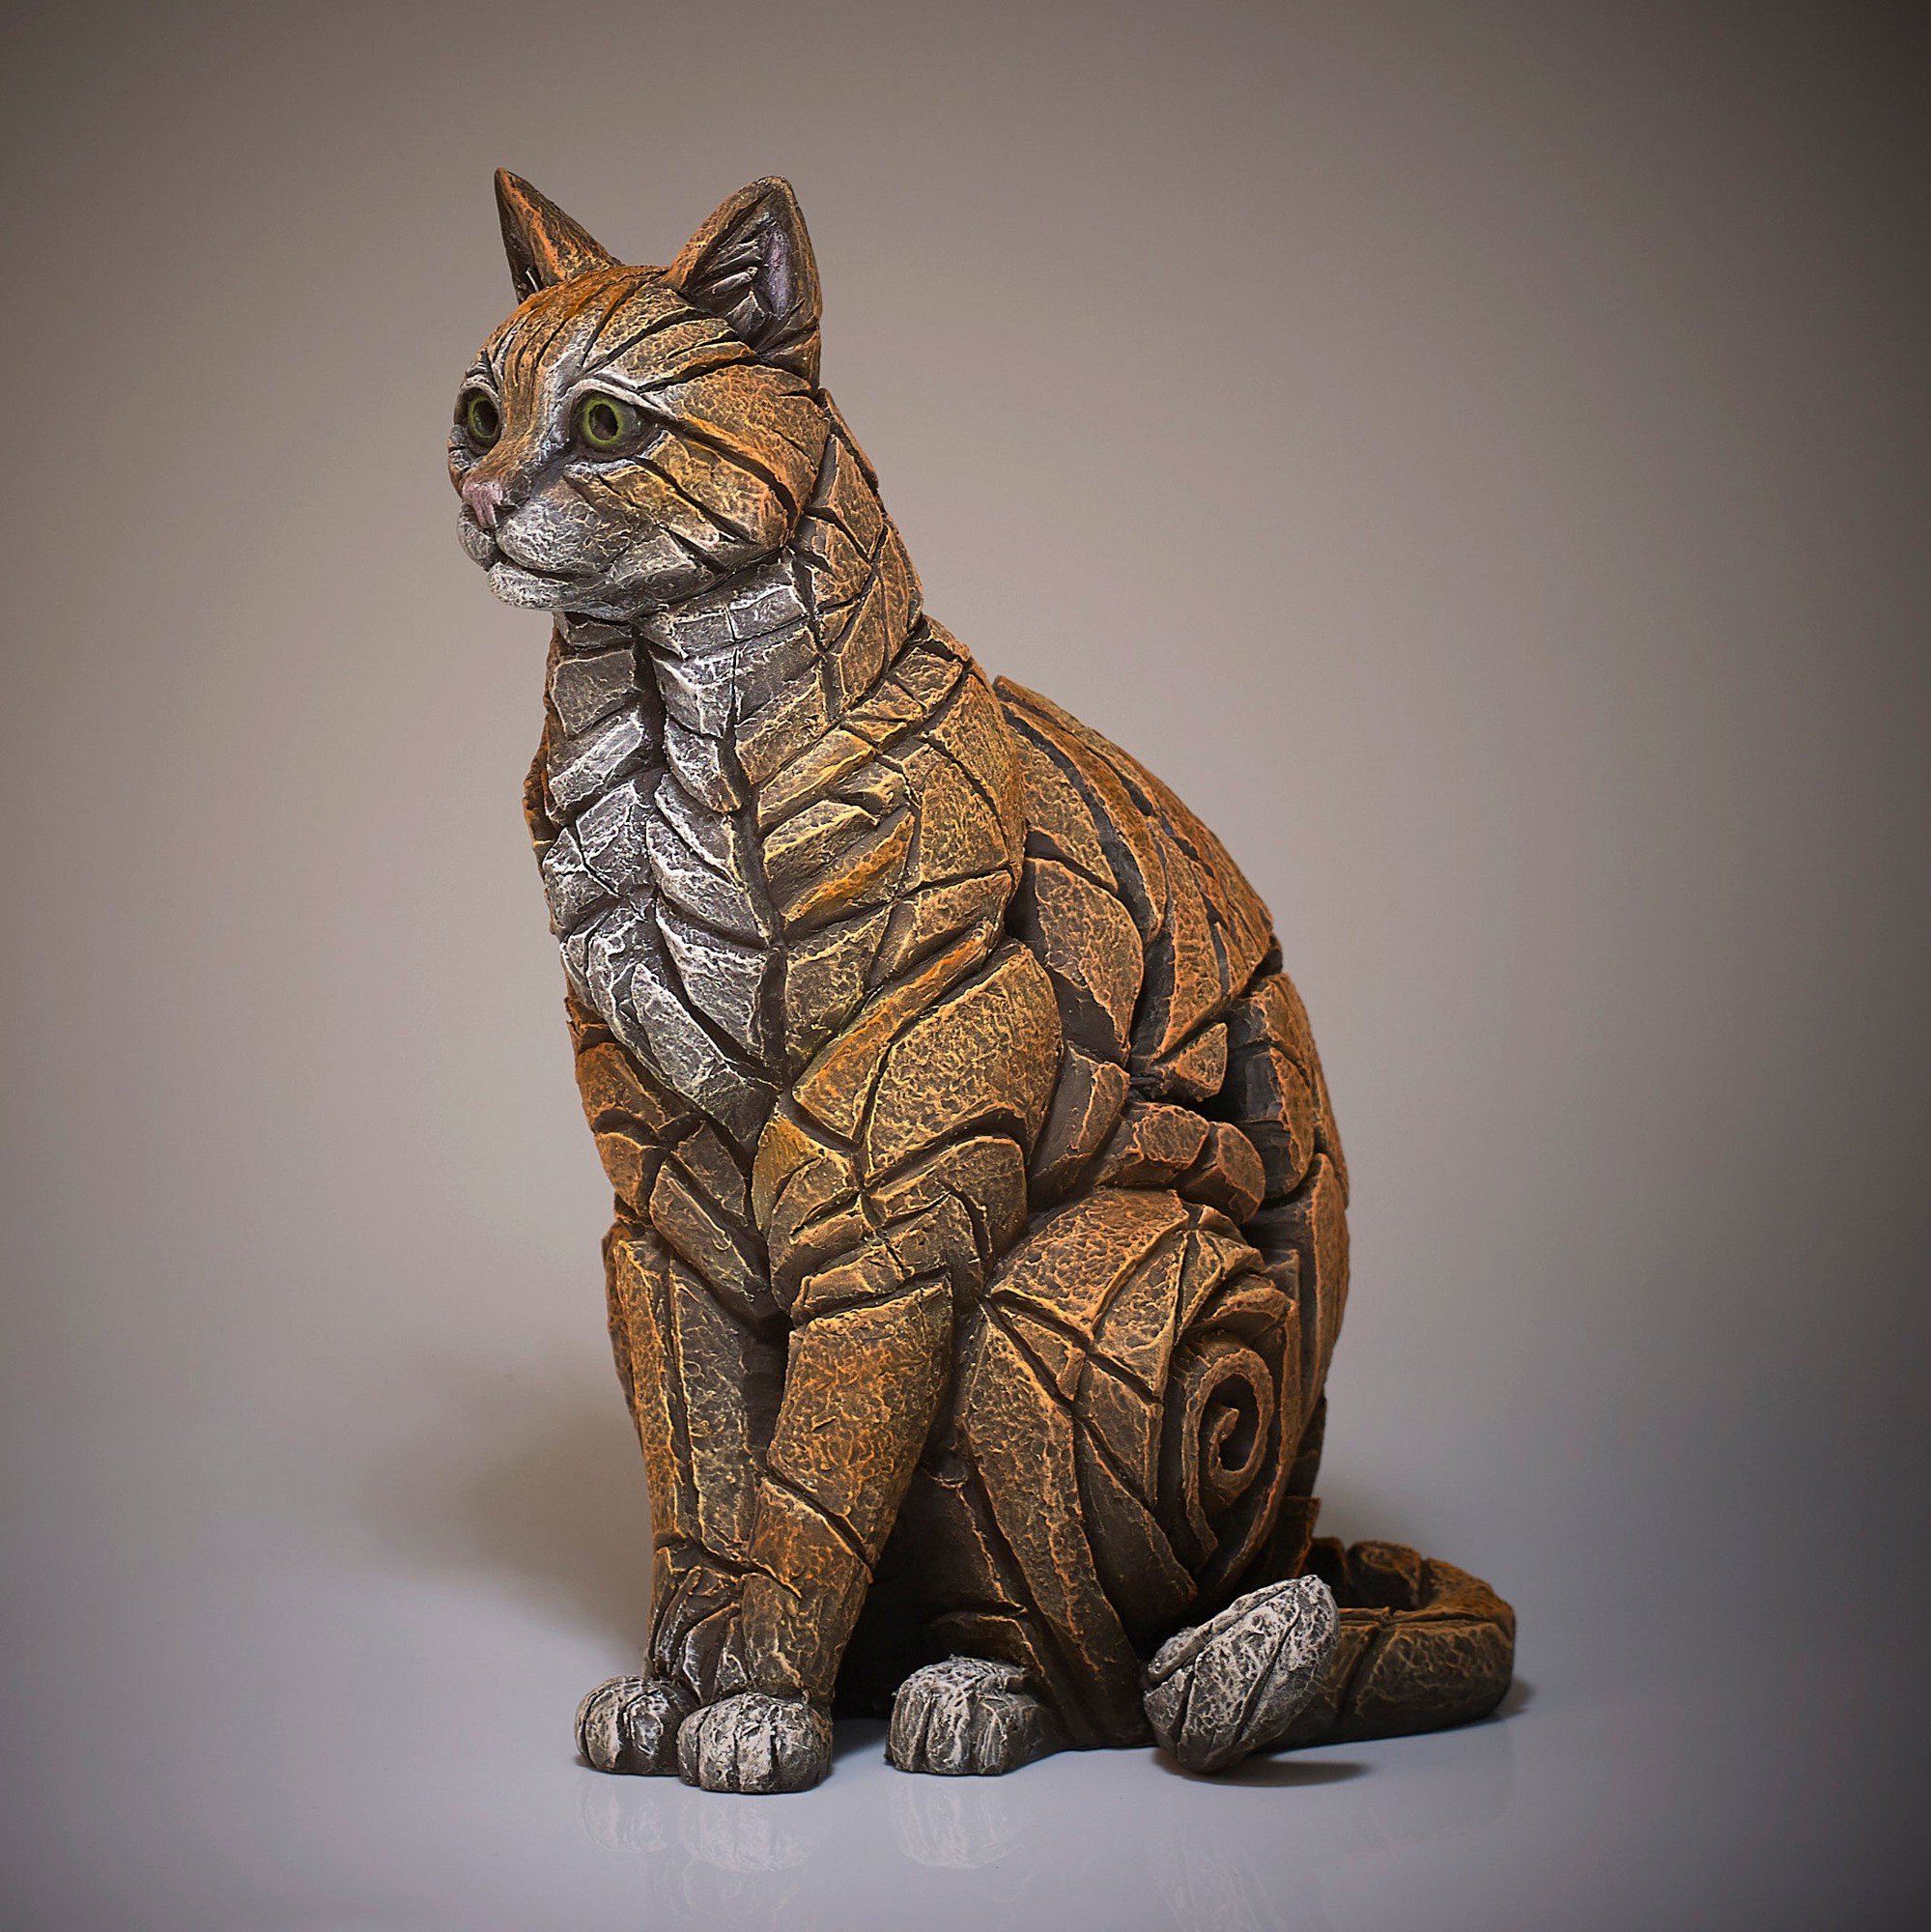 Enesco Gifts Matt Buckley The Edge Sculpture Cat Sculpture Free Shipping Ivey's Gifts And Decor